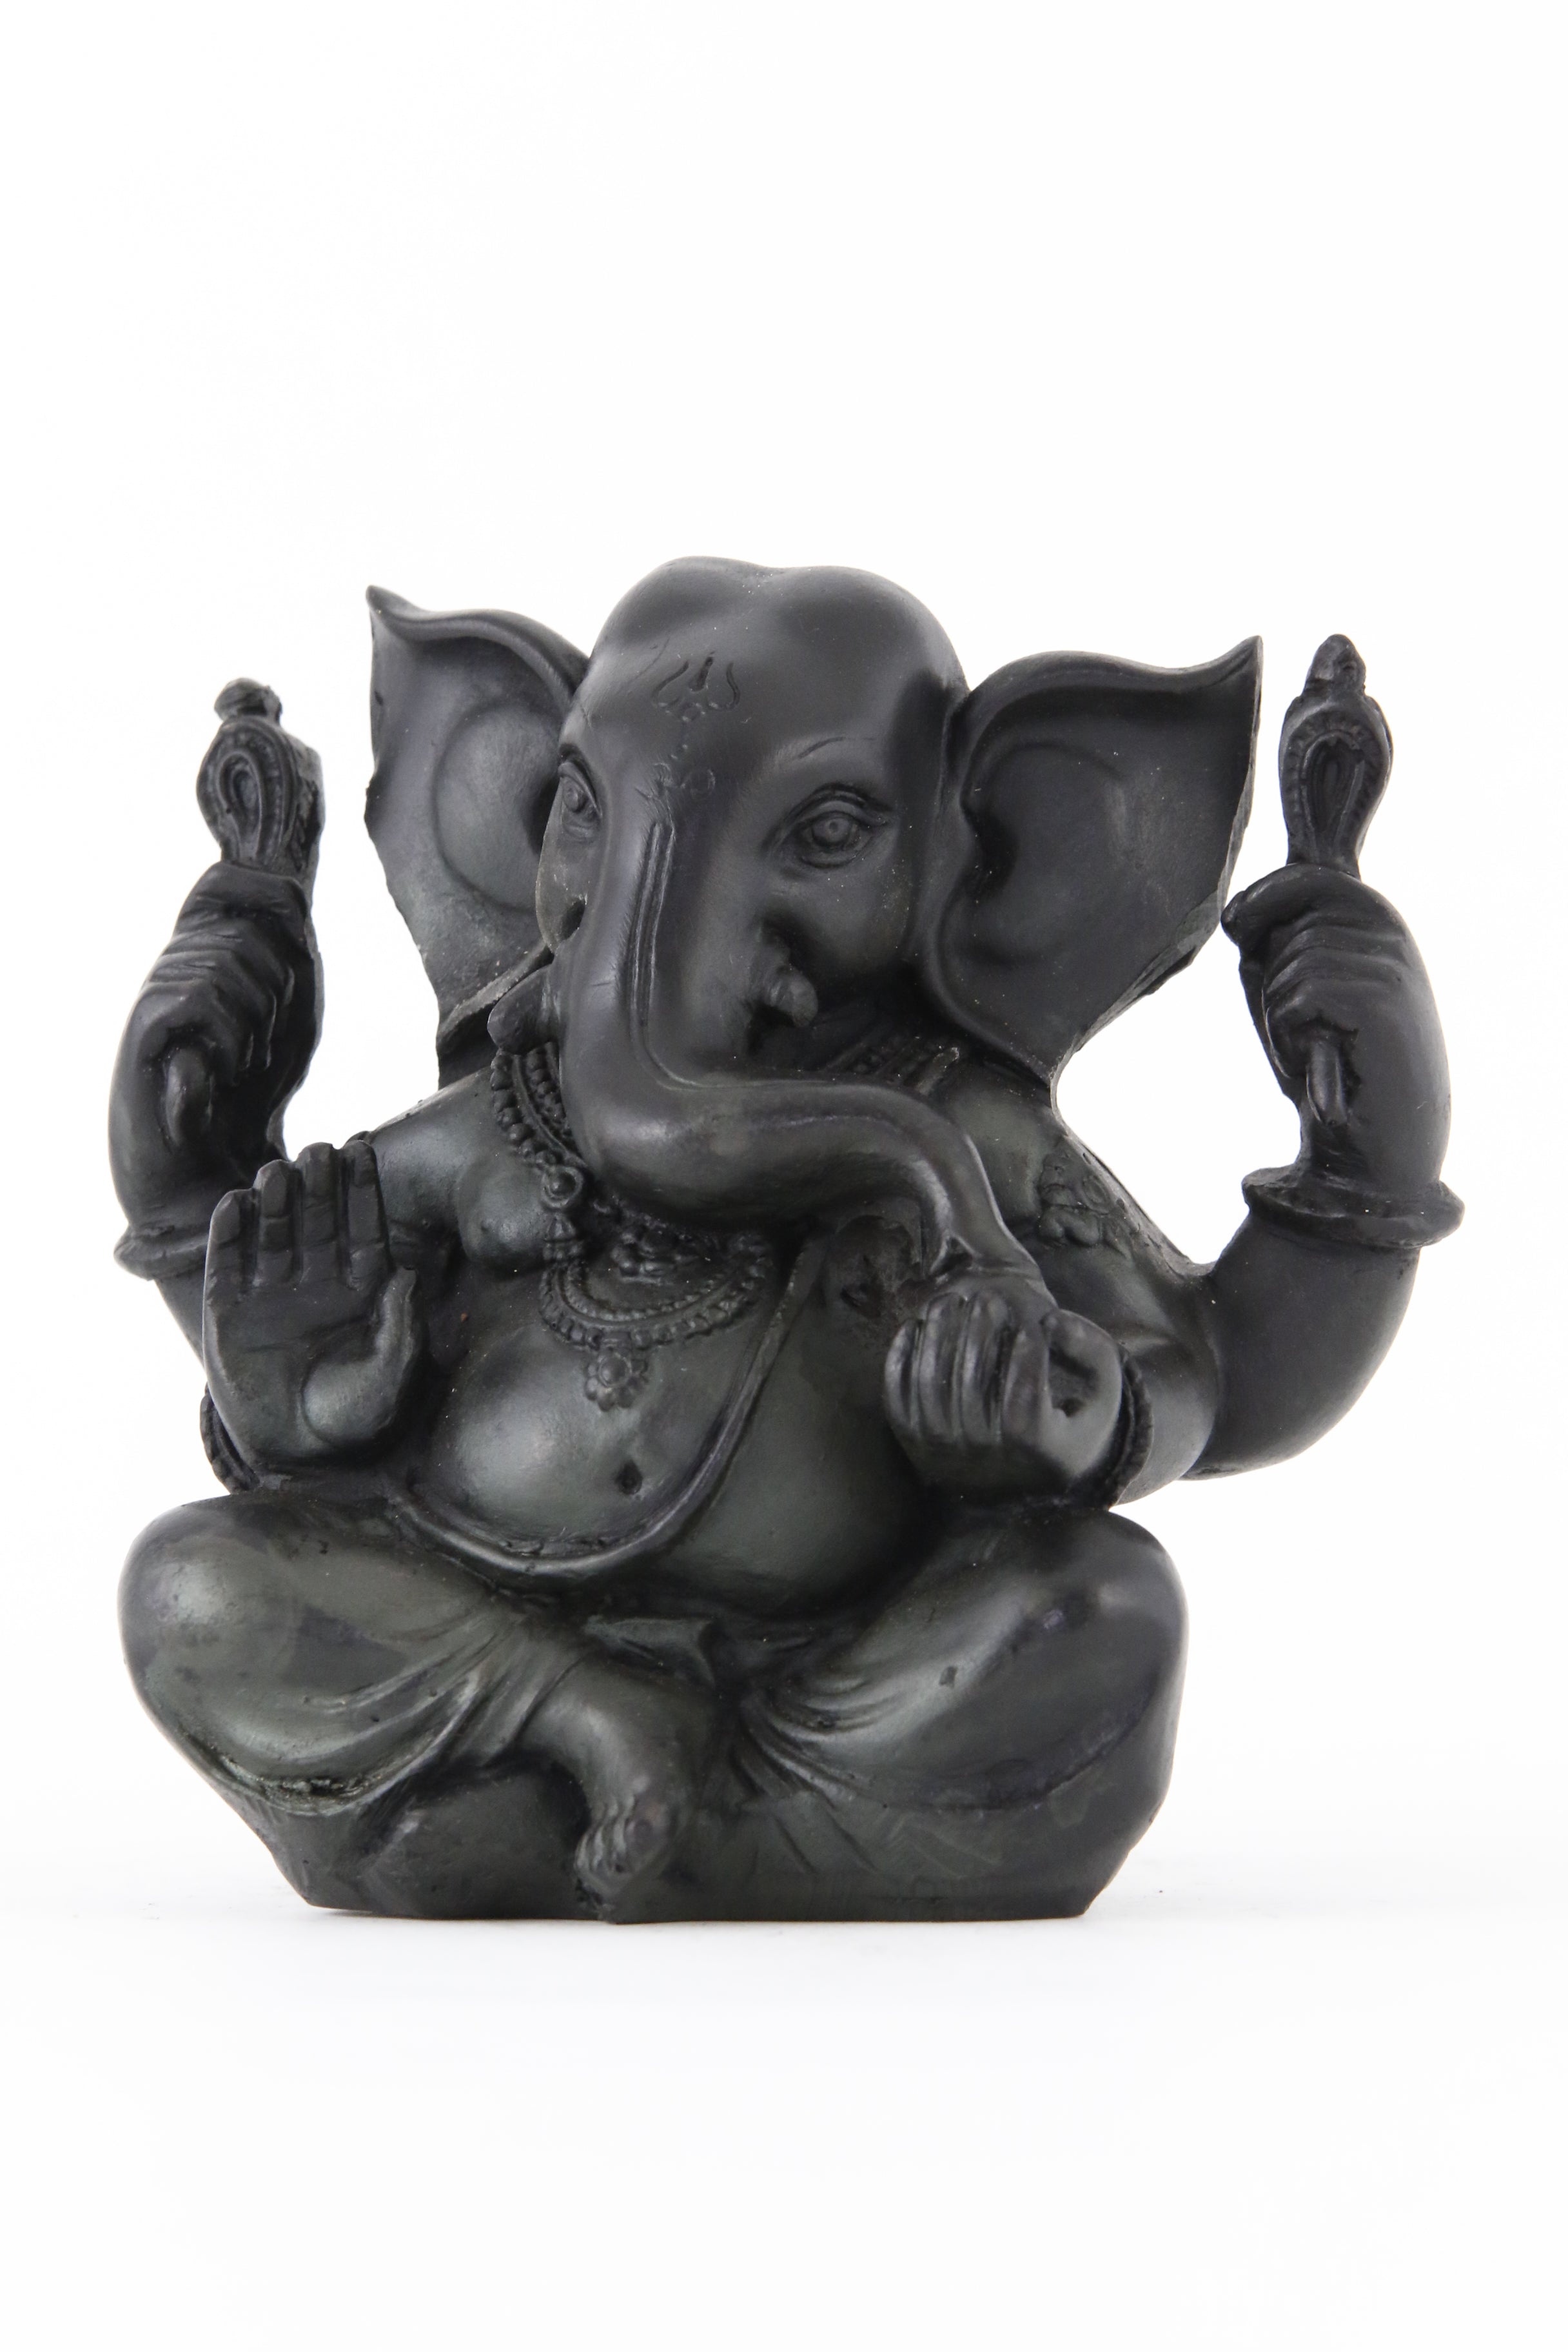 Small Brass Ganesh Dancing in Playful Pose with Vahana Mooshika By His Side  7.5